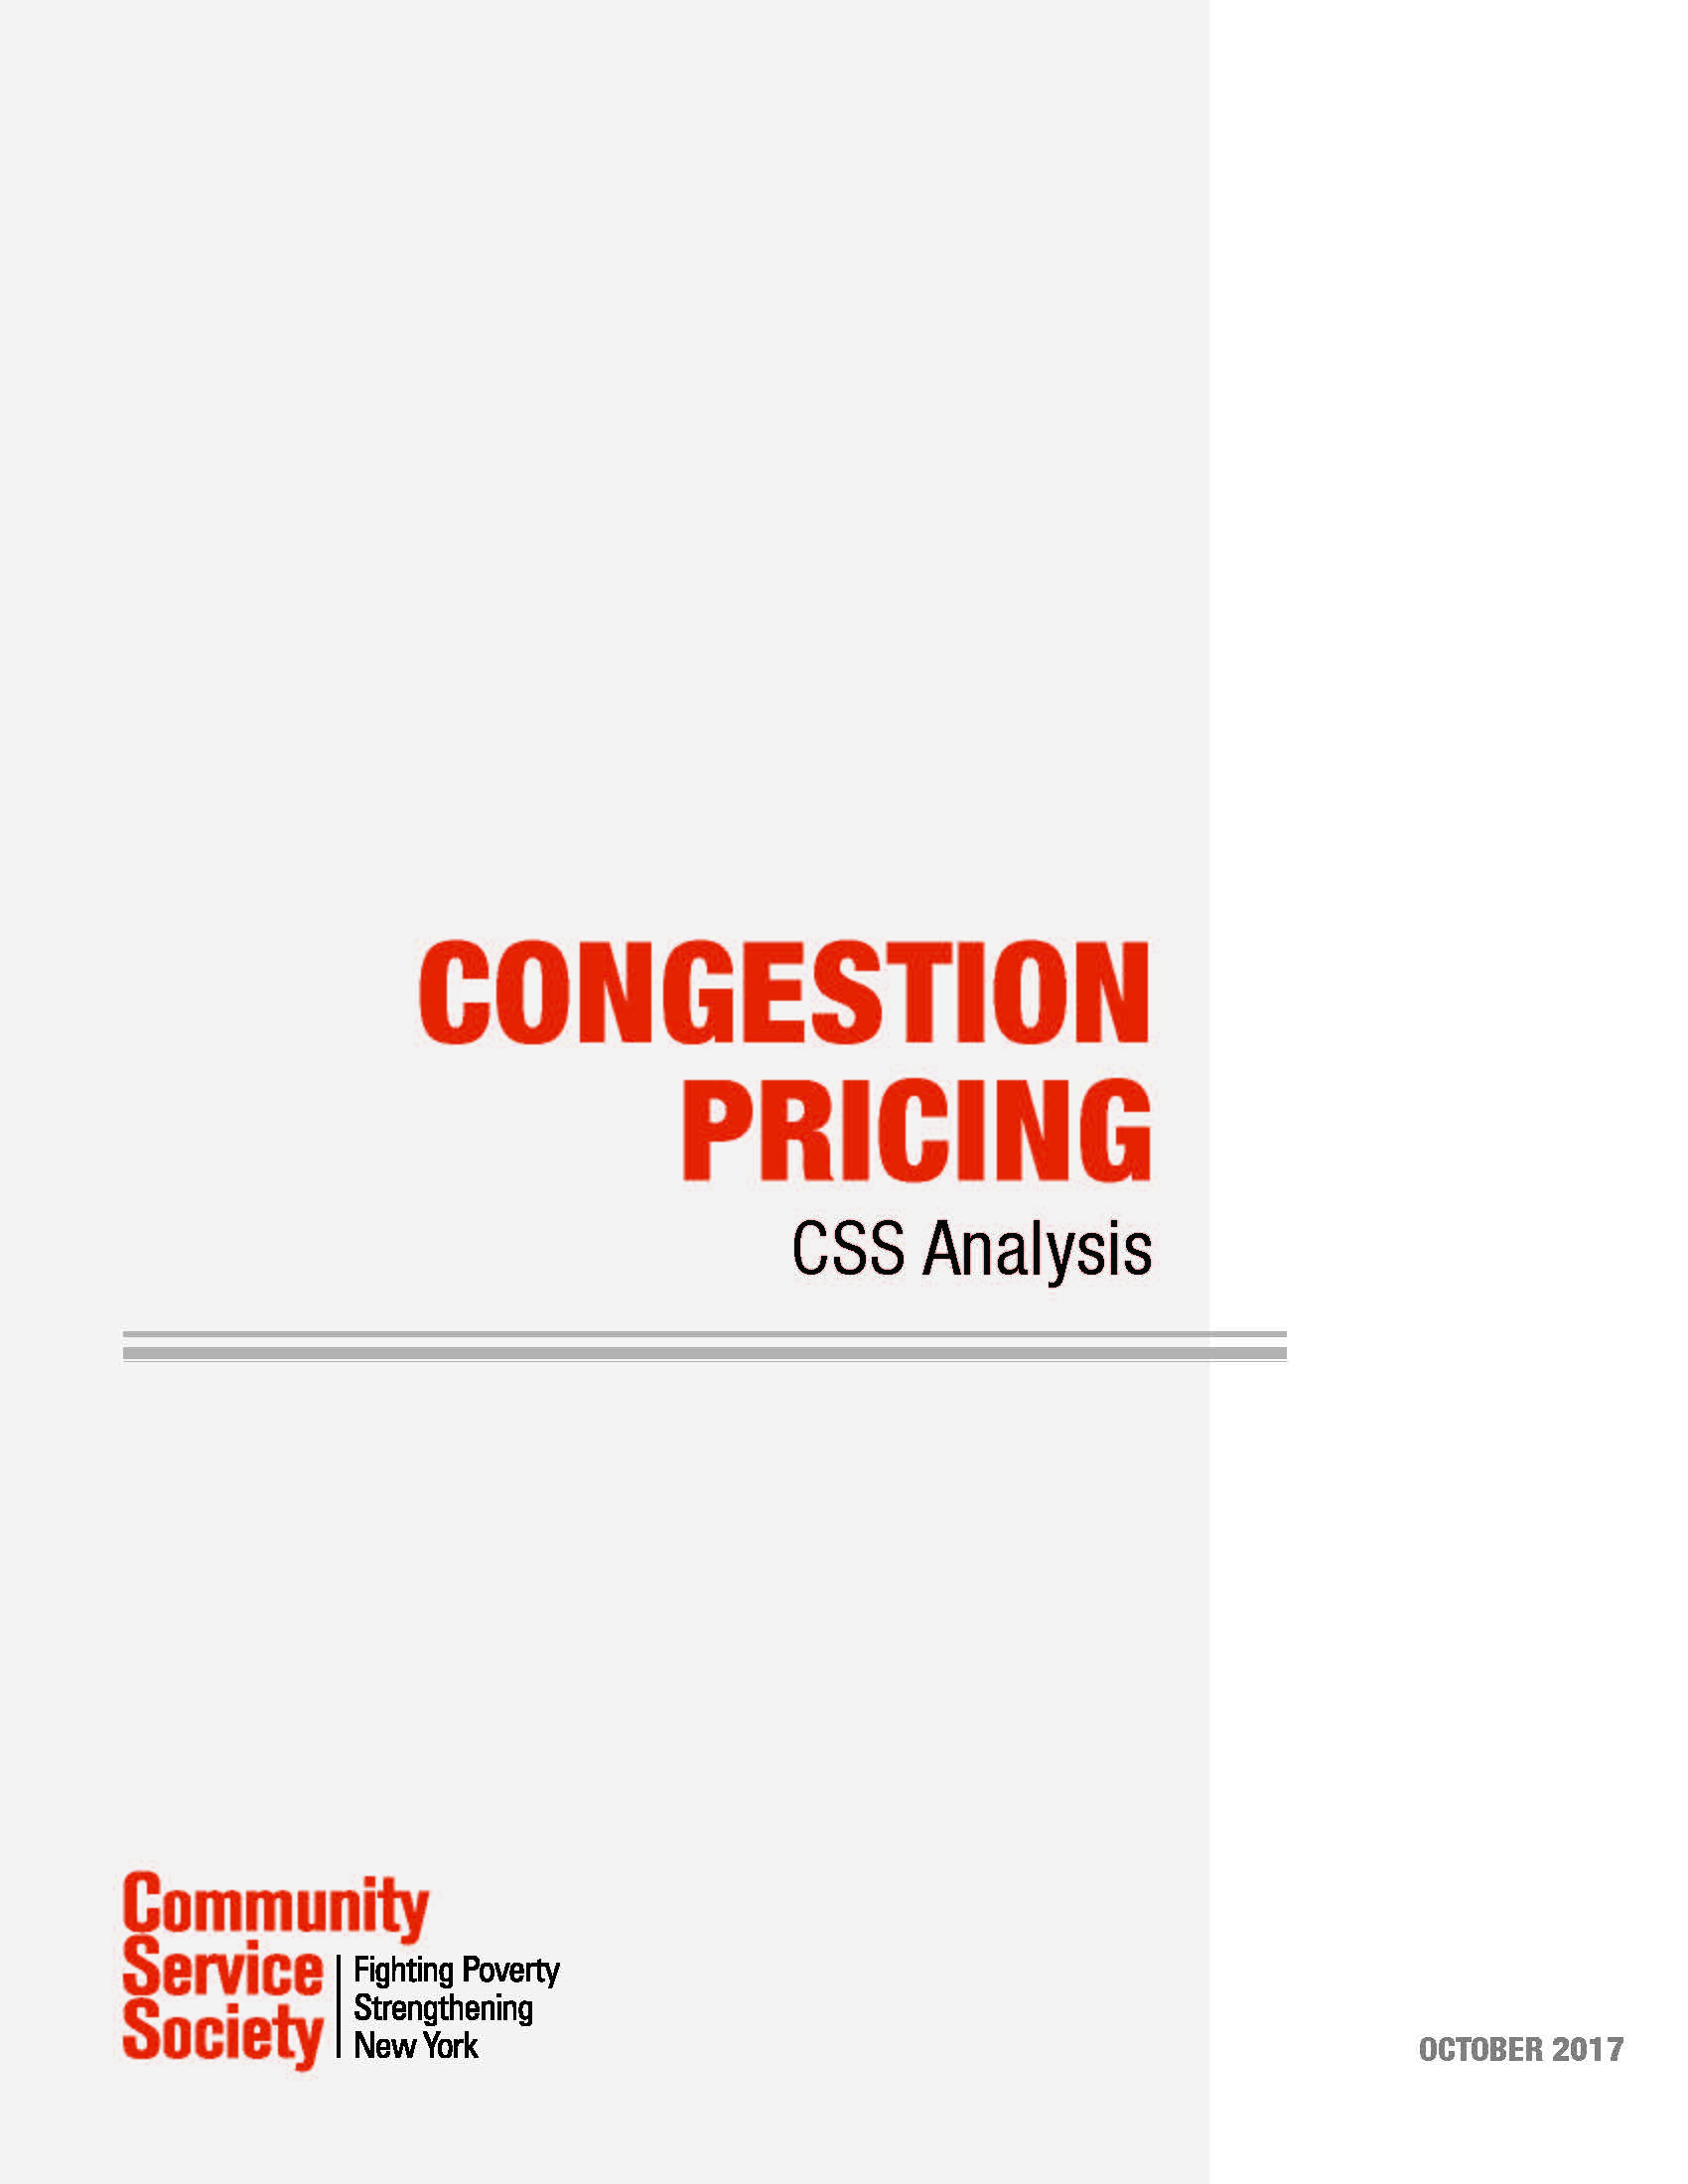 Congestion Pricing, CSS Analysis